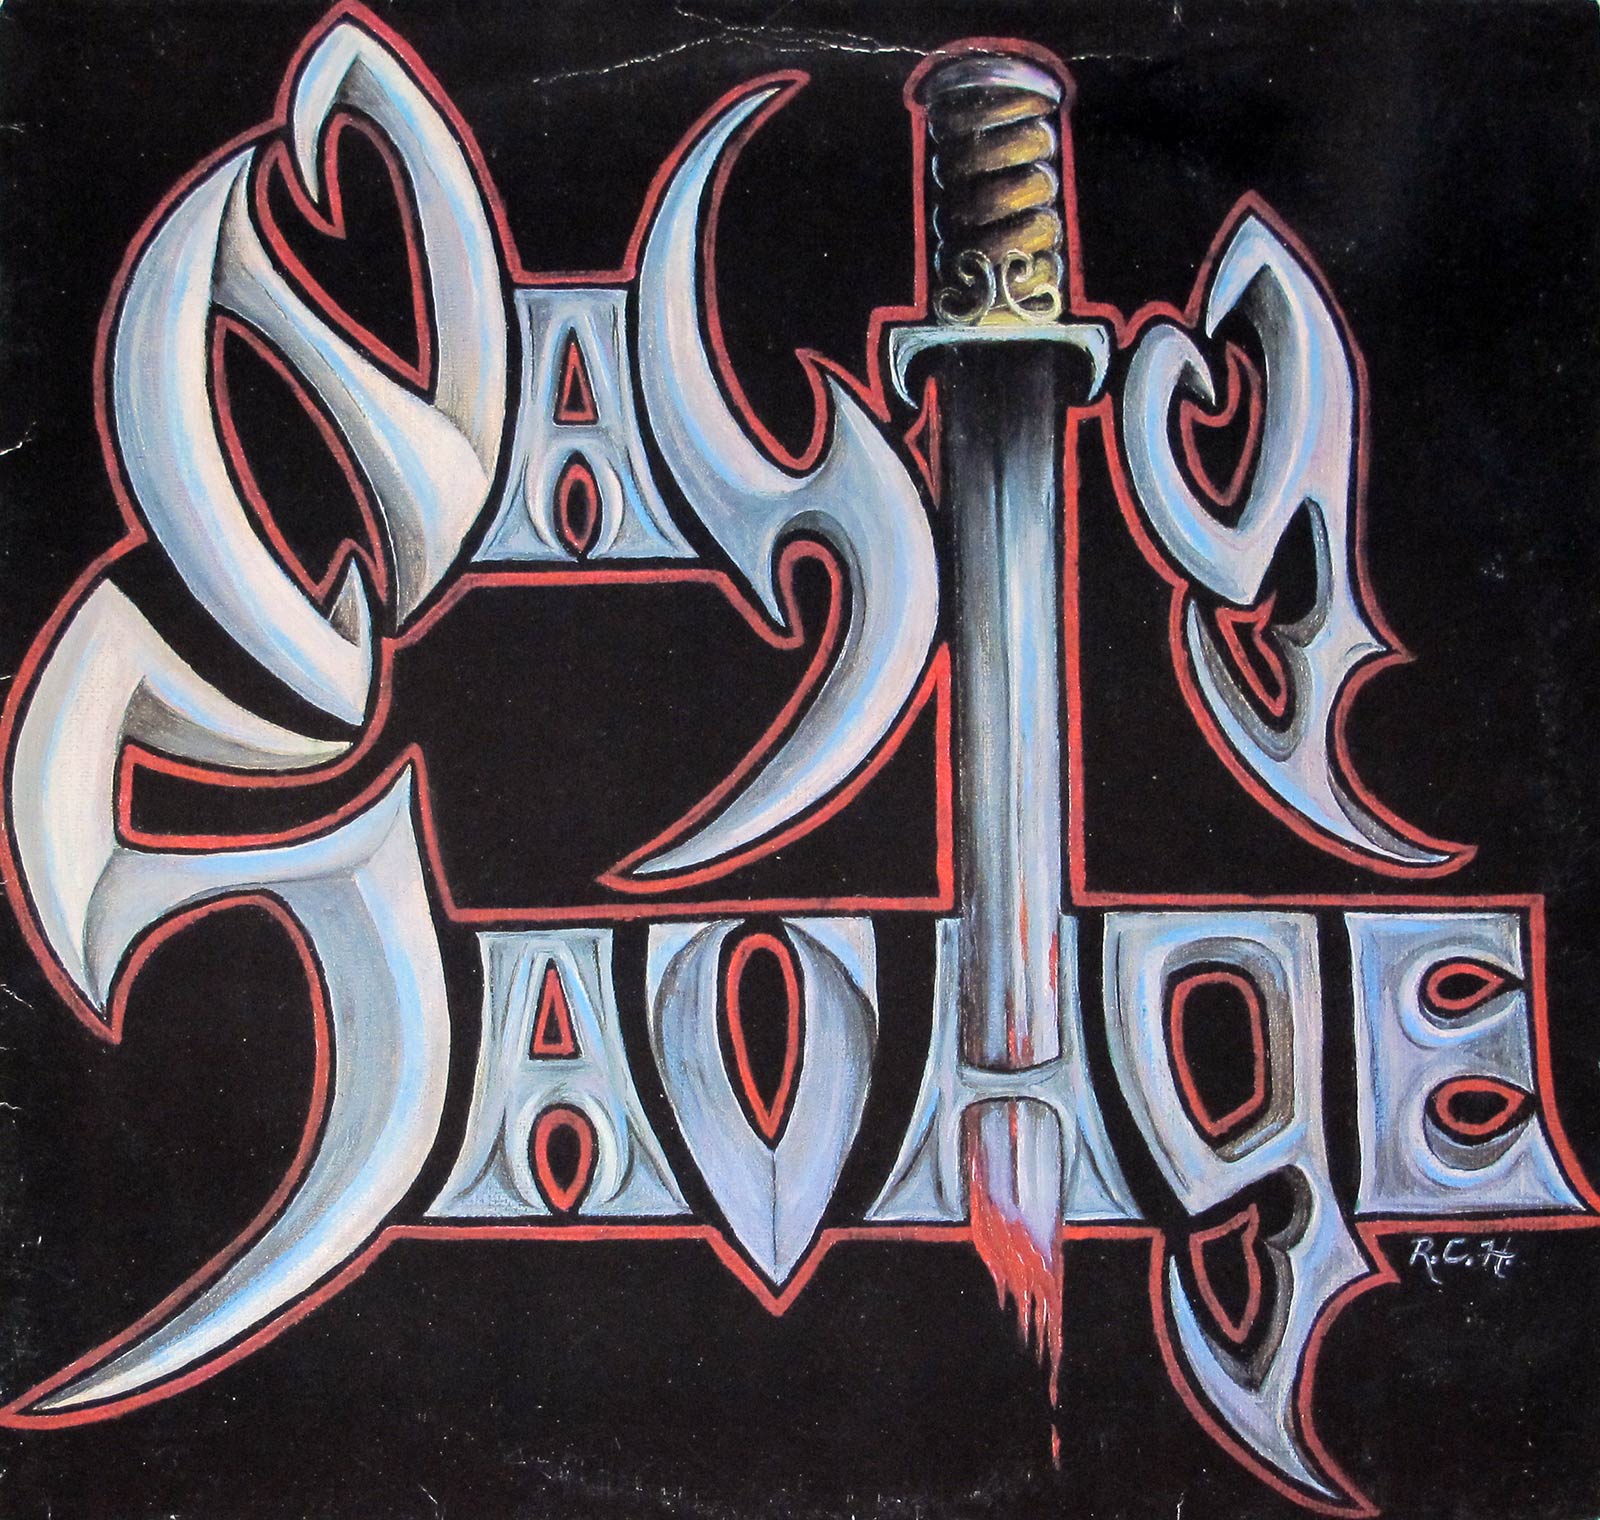 large photo of Nasty Savage self-titled album front cover